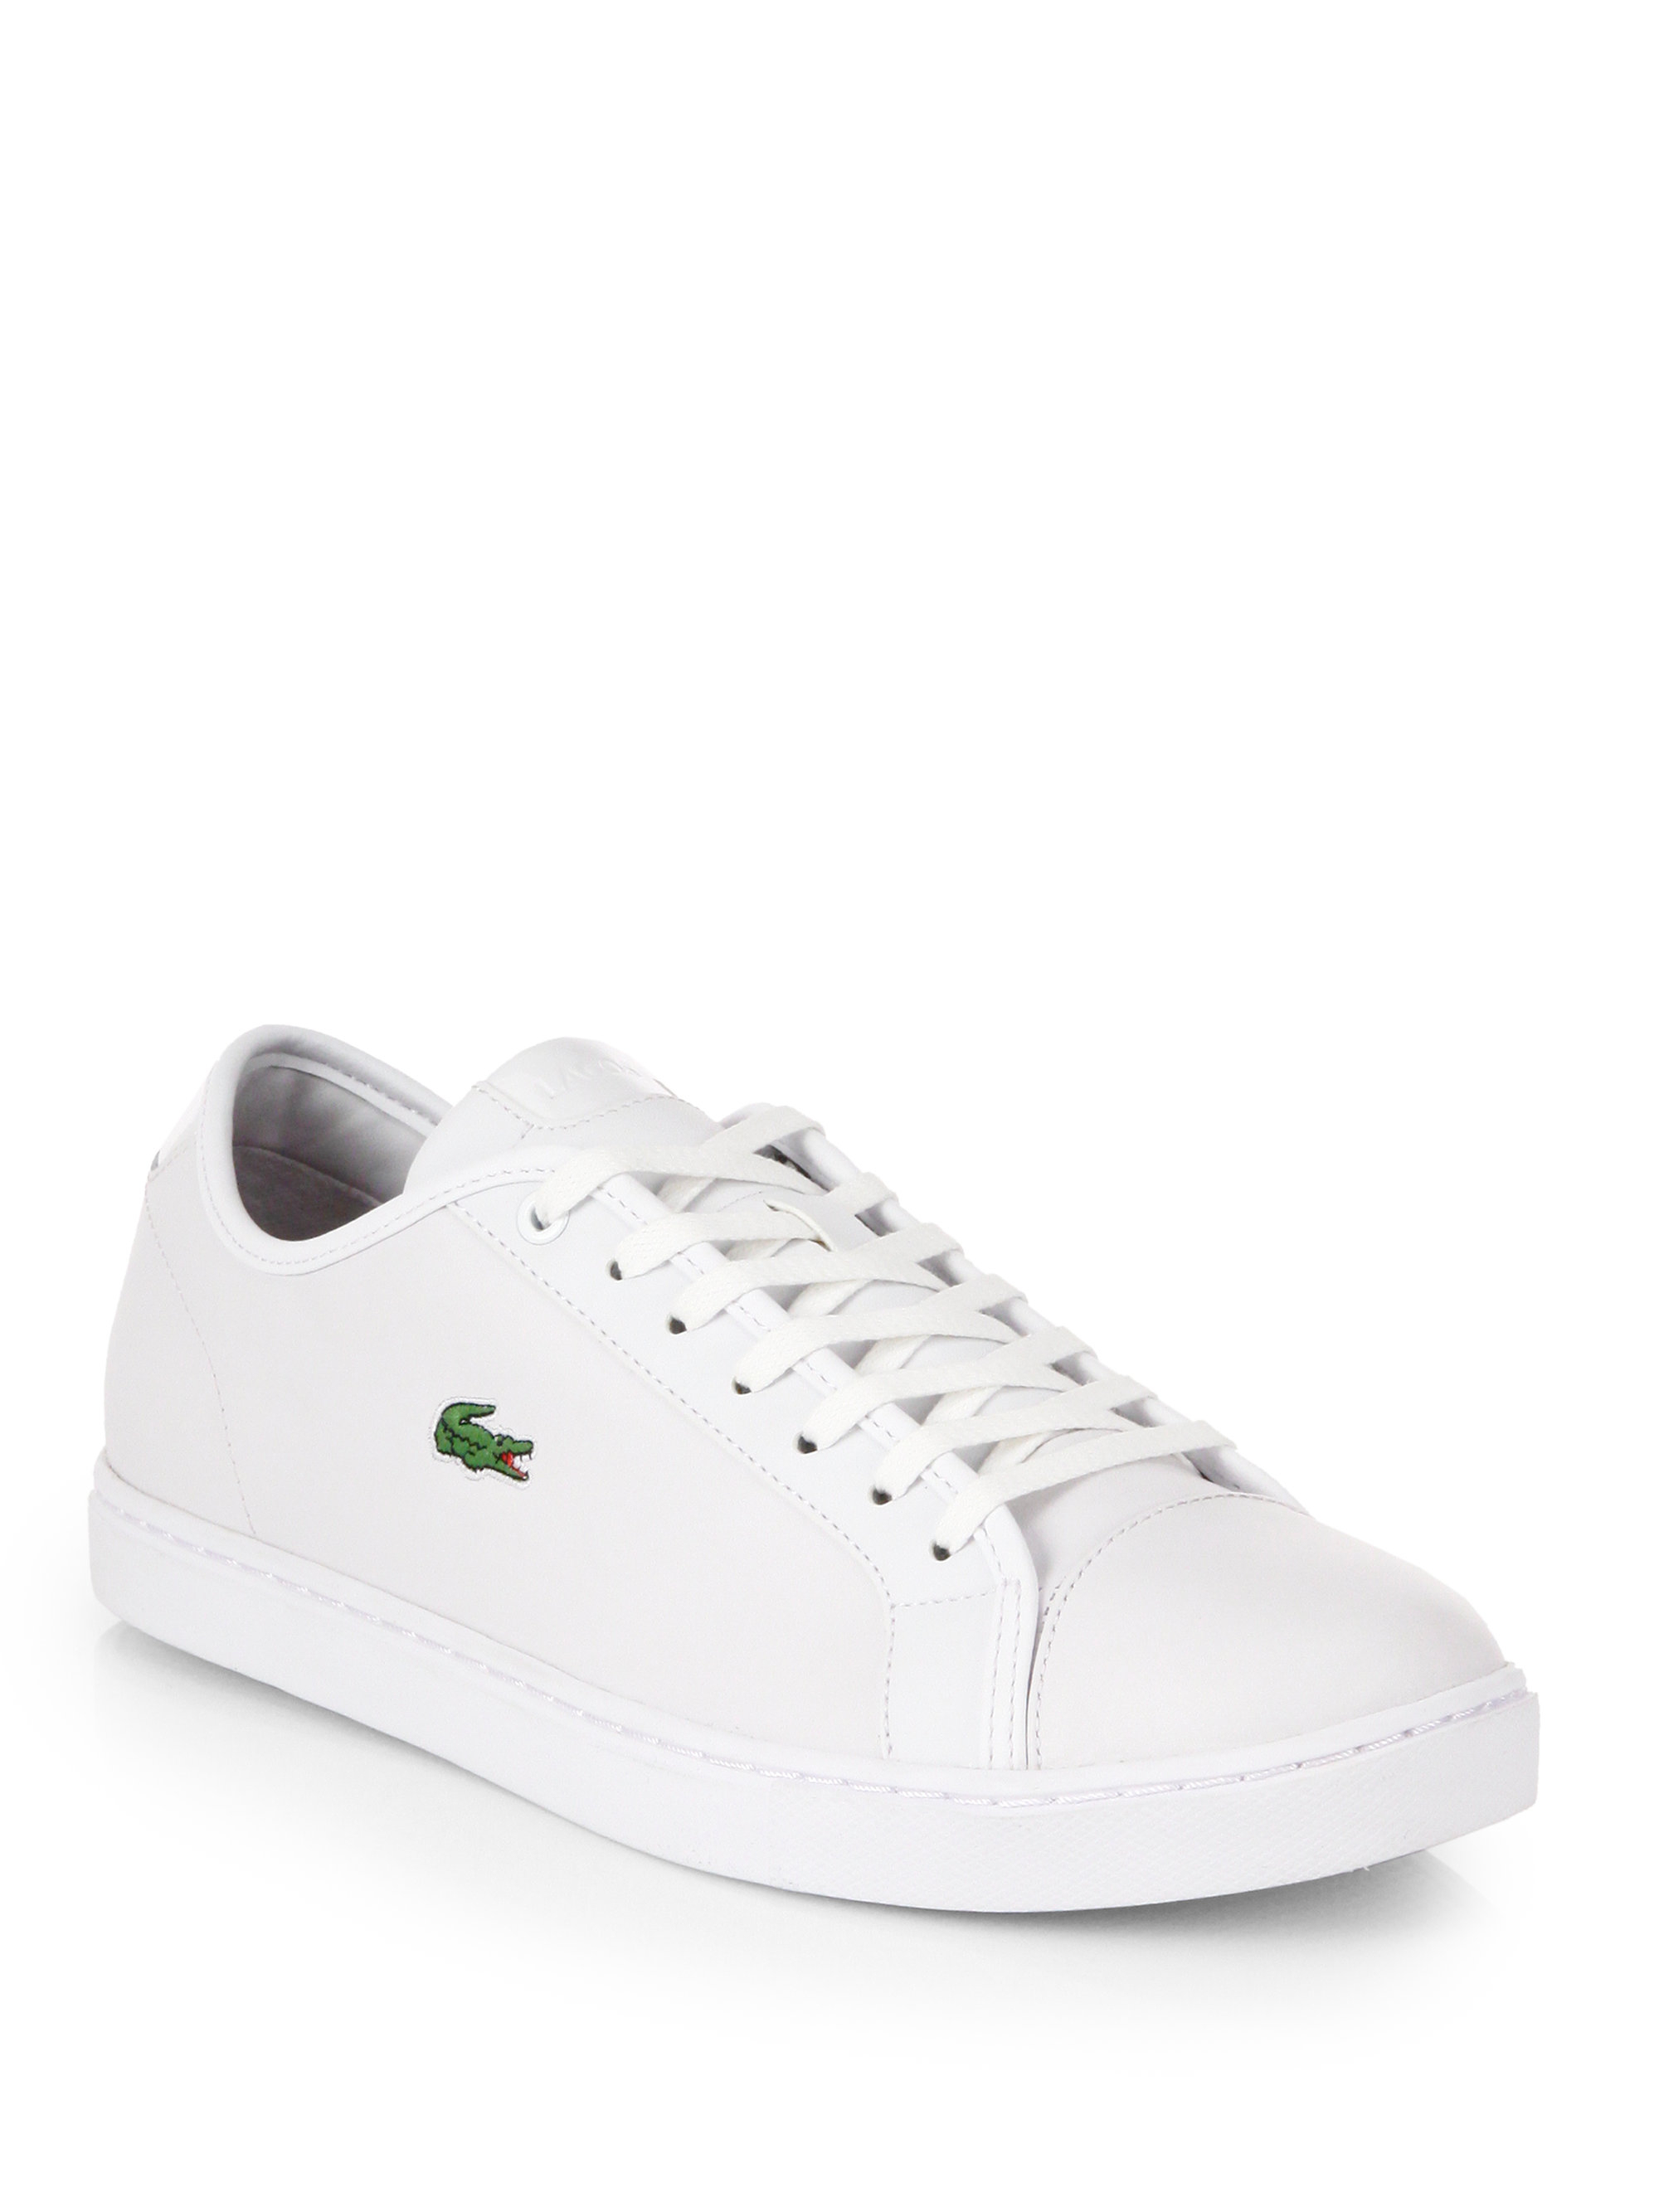 Lacoste Leather Tennis Shoes in White 